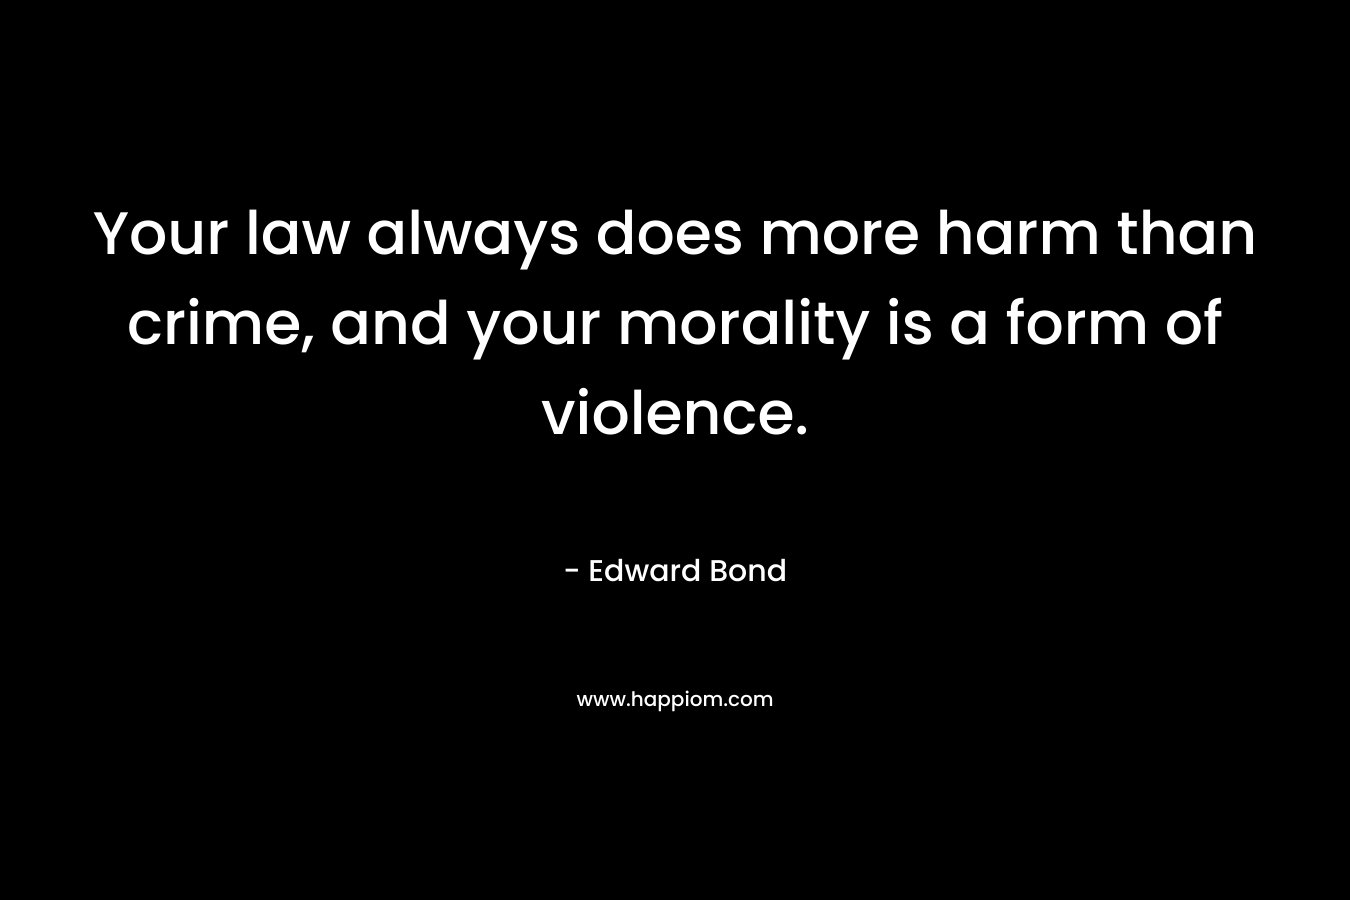 Your law always does more harm than crime, and your morality is a form of violence. – Edward Bond